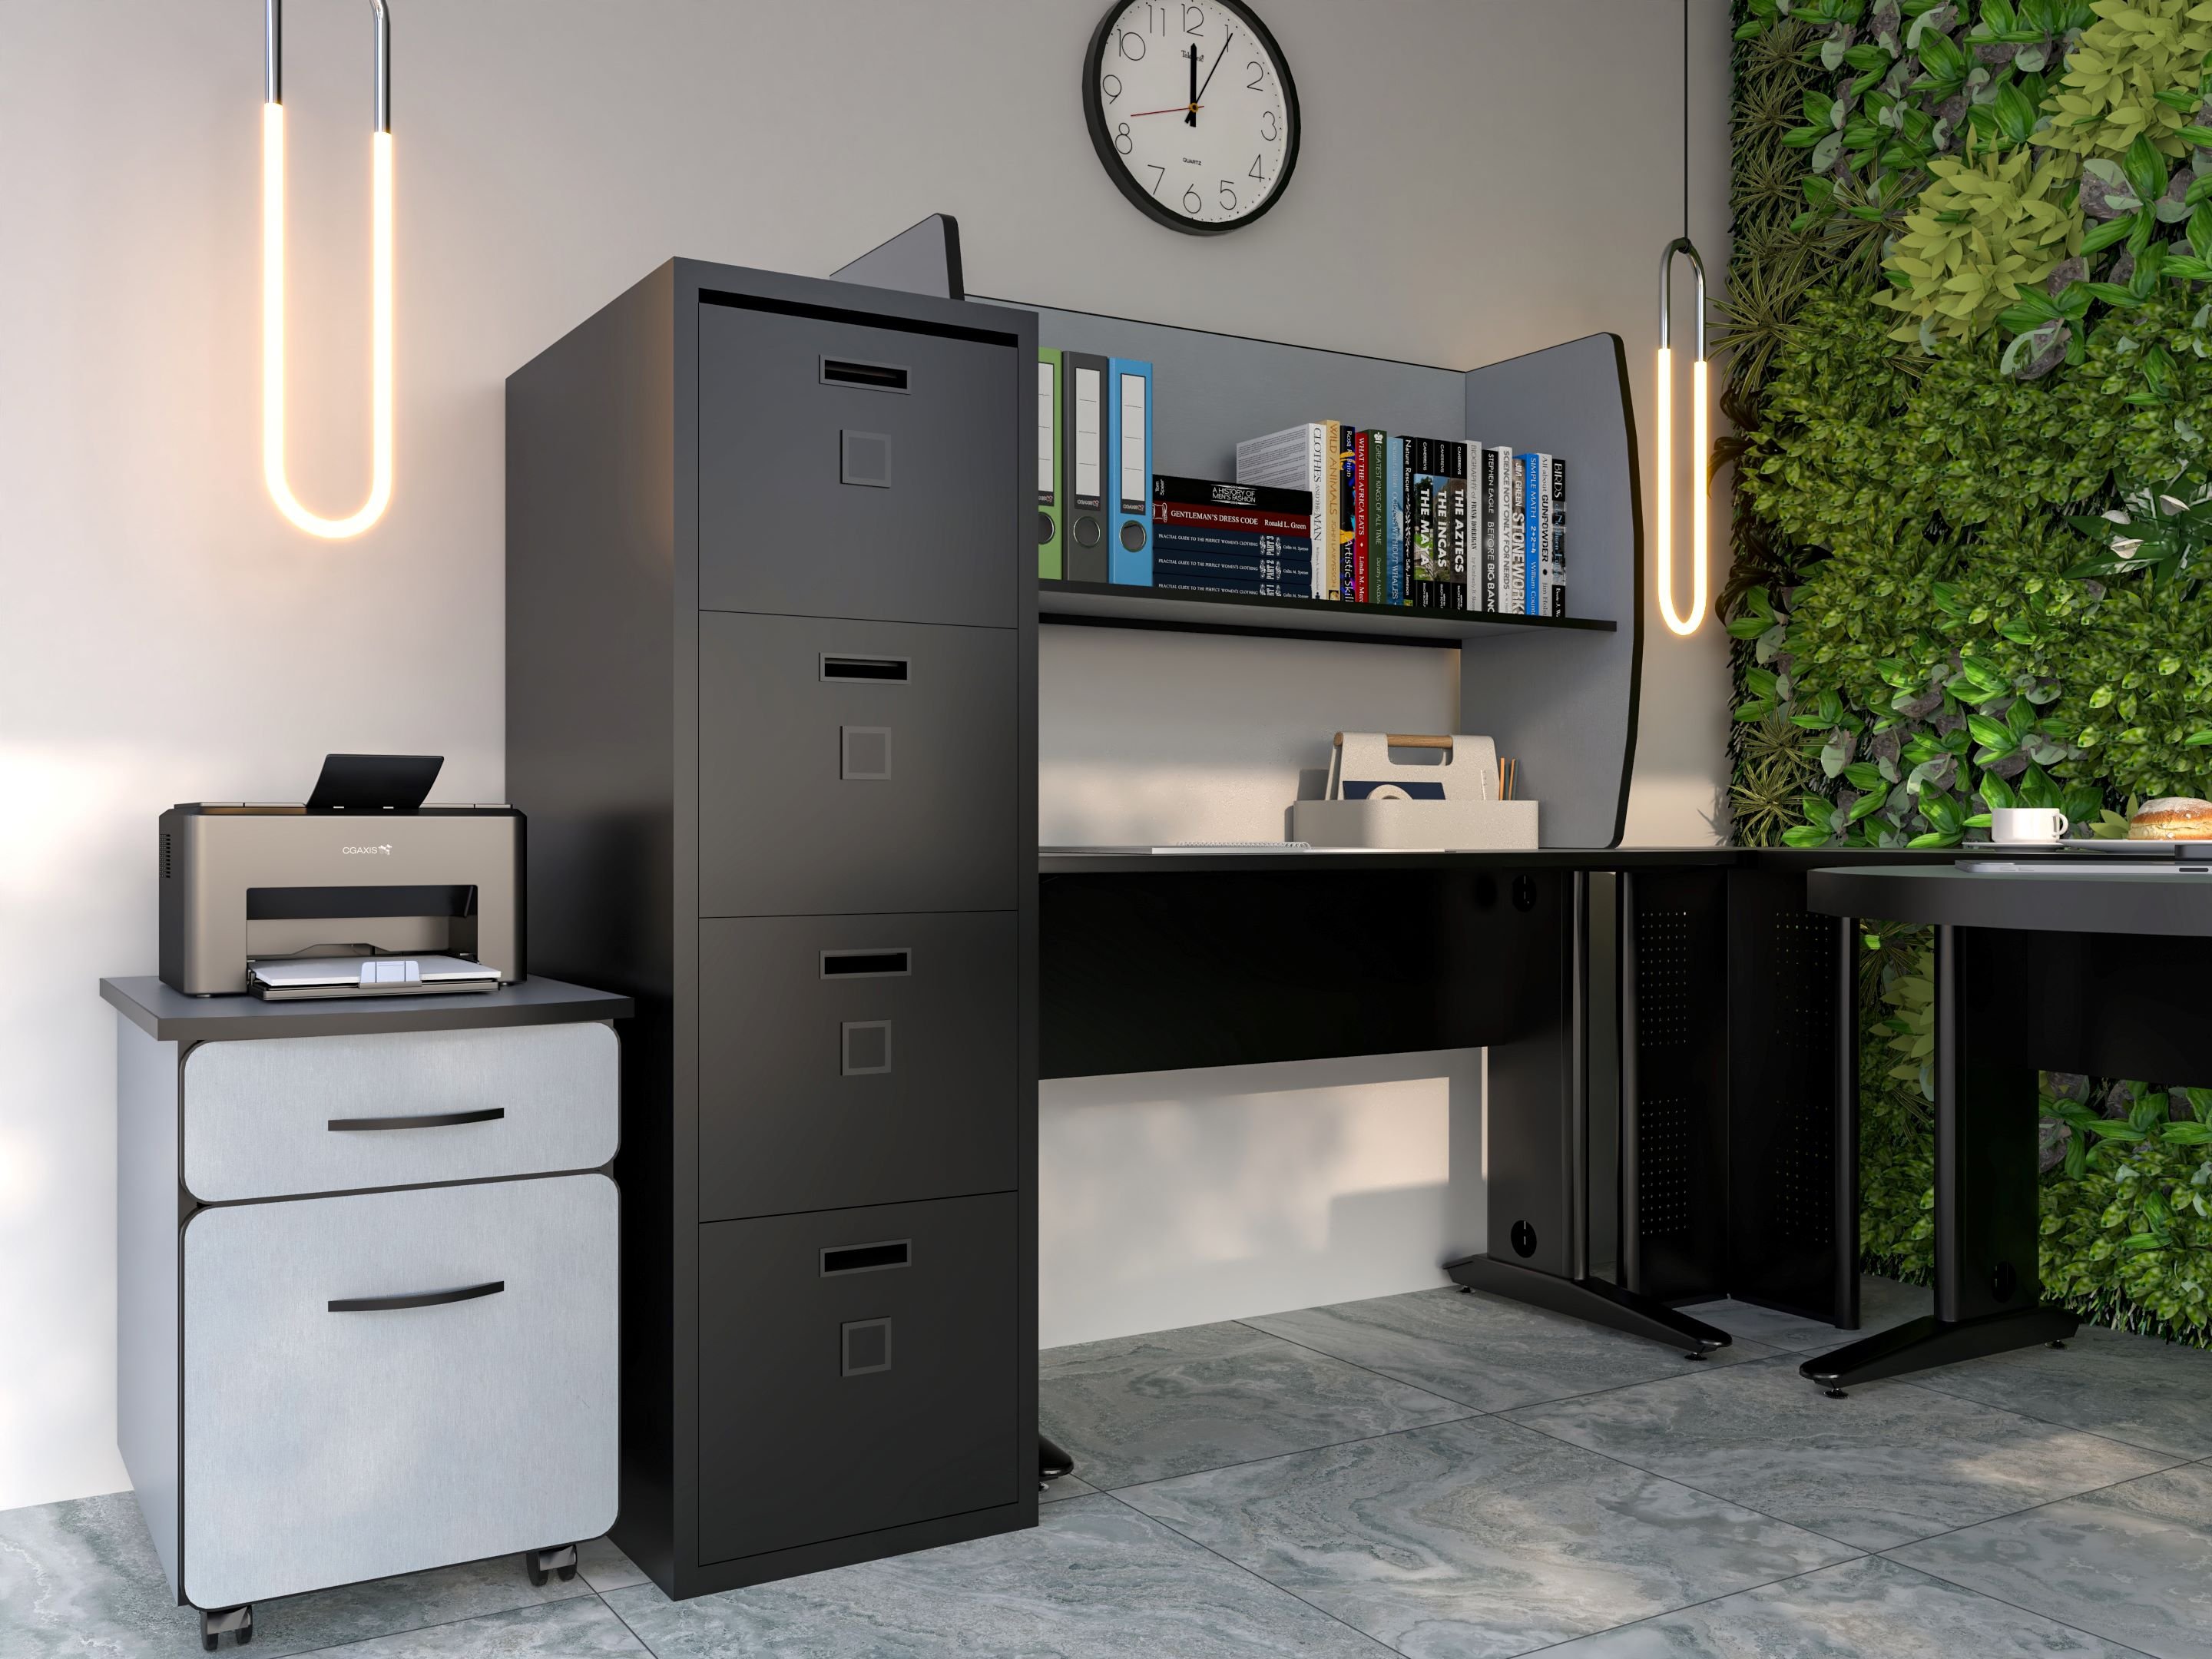 Must-Have Furniture for Your Home Office